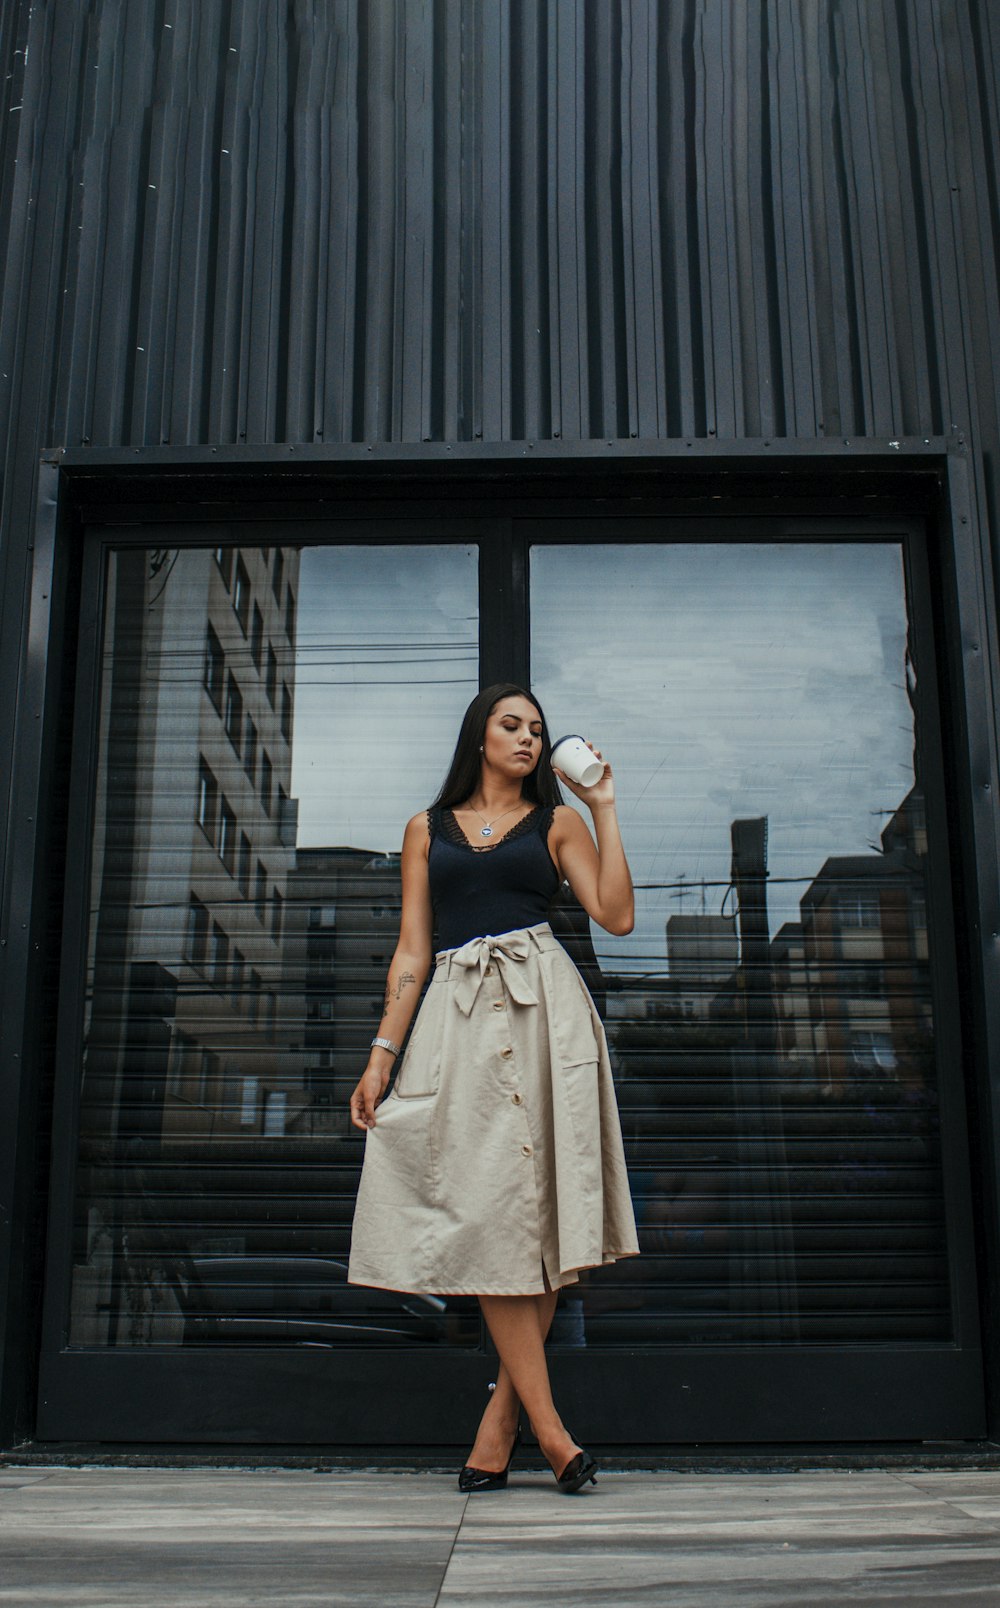 Long Skirt Pictures | Download Free Images on Unsplash